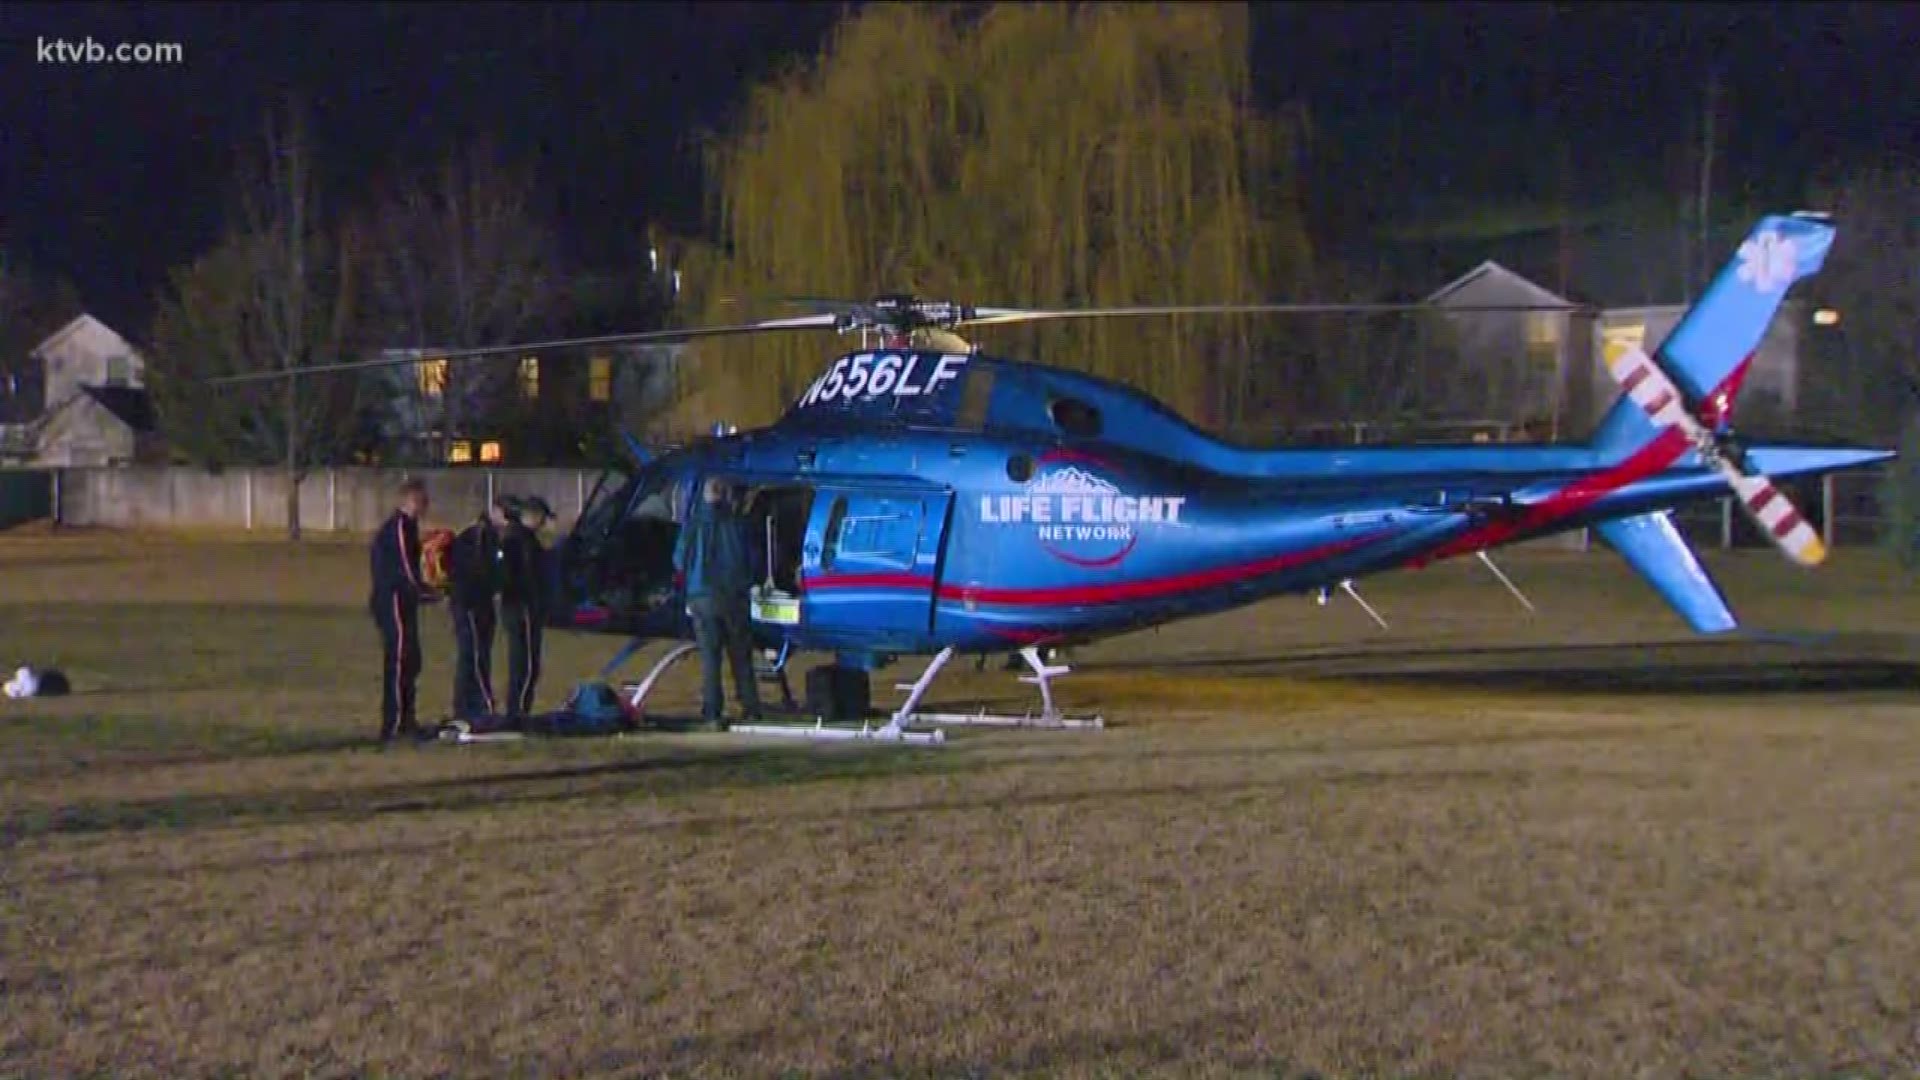 The medical helicopter pilot had to put down in a soccer field near Rocky Mountain High School.